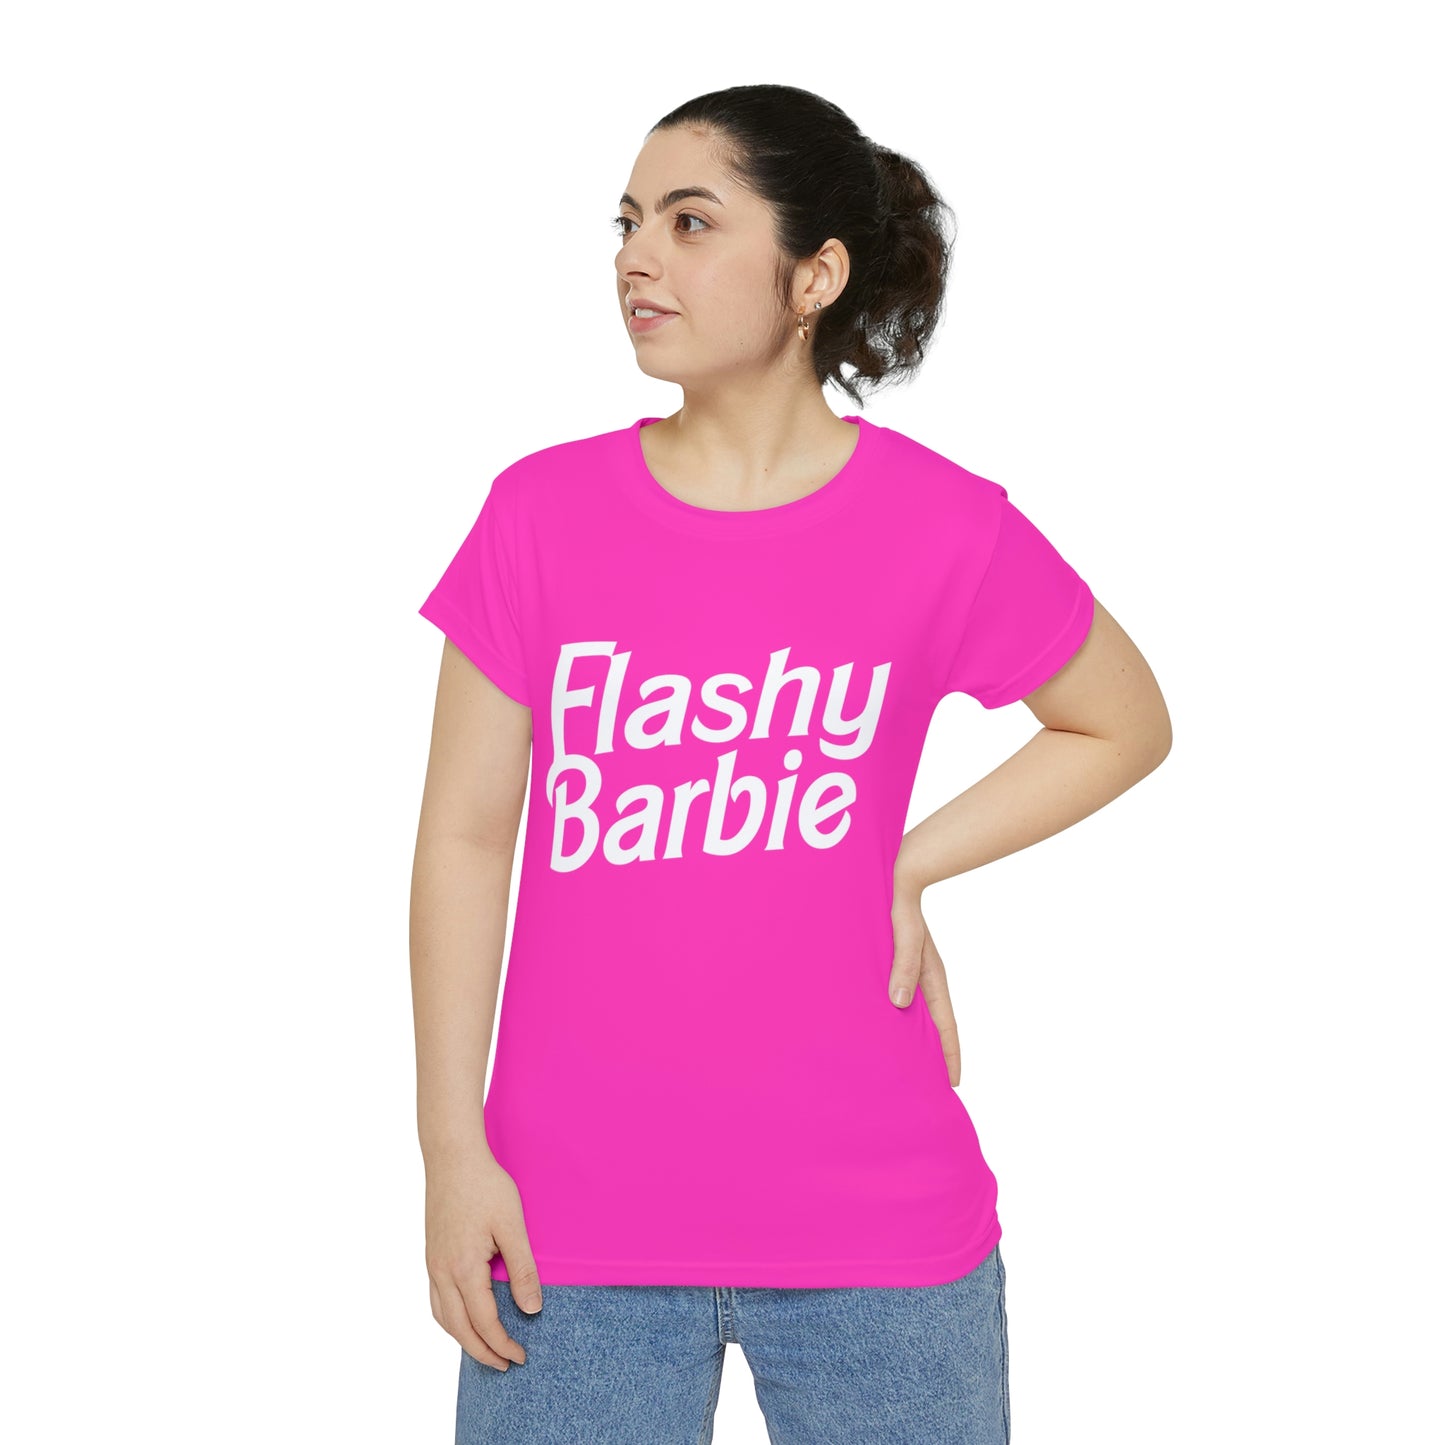 Flashy Barbie, Bachelorette Party Shirts, Bridesmaid Gifts, Here comes the Party Tees, Group Party Favor Shirts, Bridal Party Shirt for women